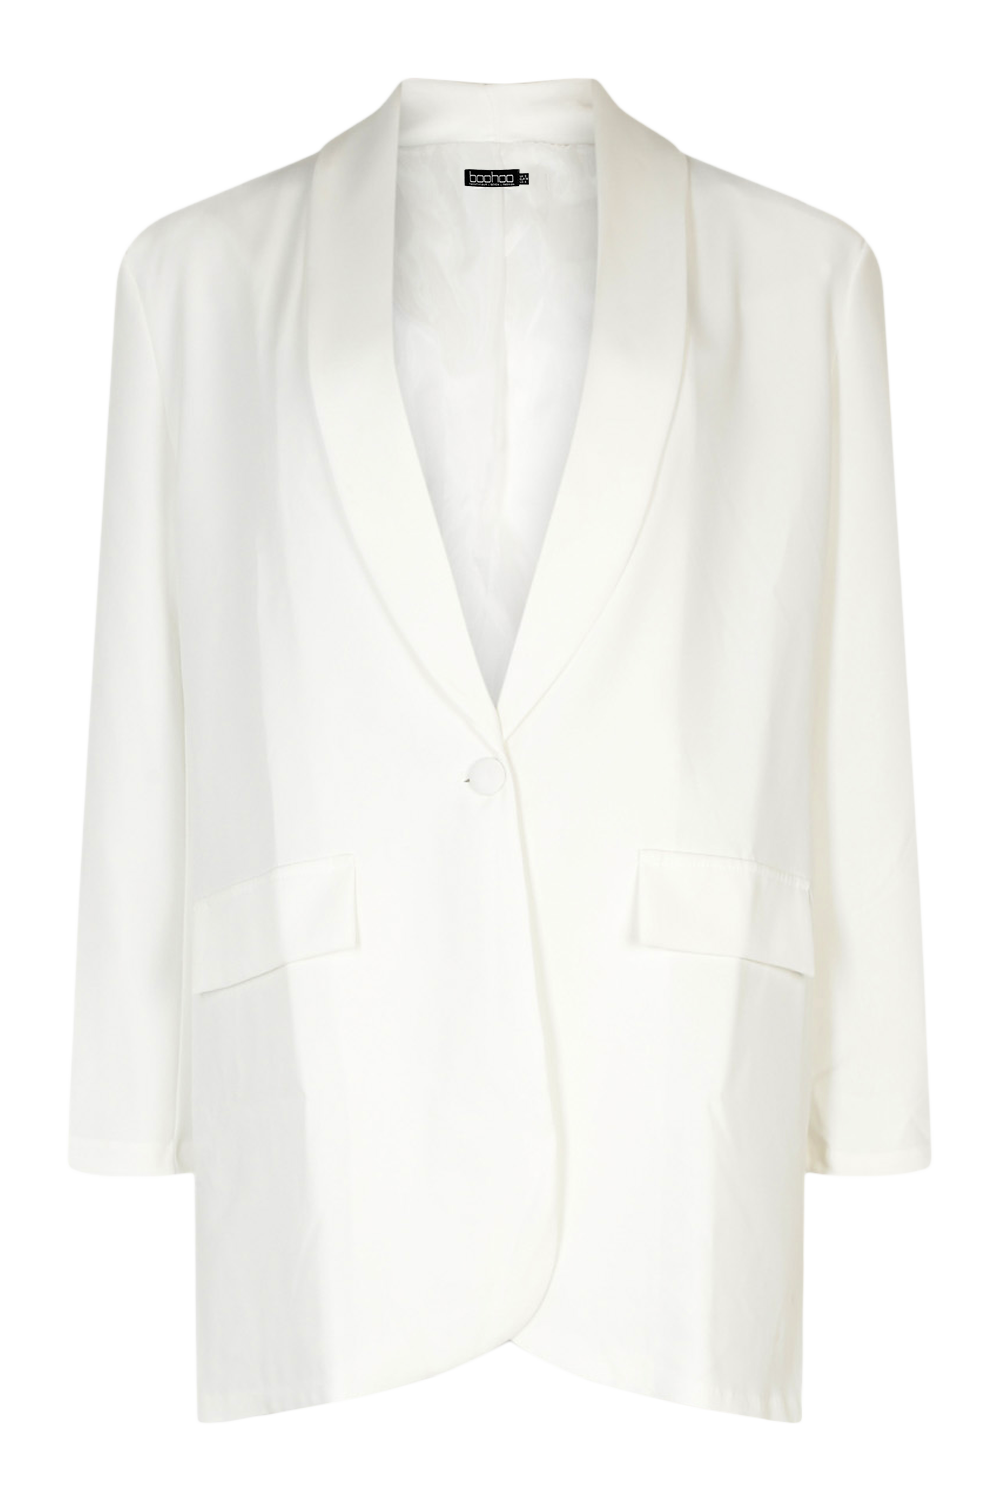 sport coats and suit jackets Boohoo Shoulder Pad Plunge Oversized Blazer in Ivory Womens Clothing Jackets Blazers White 